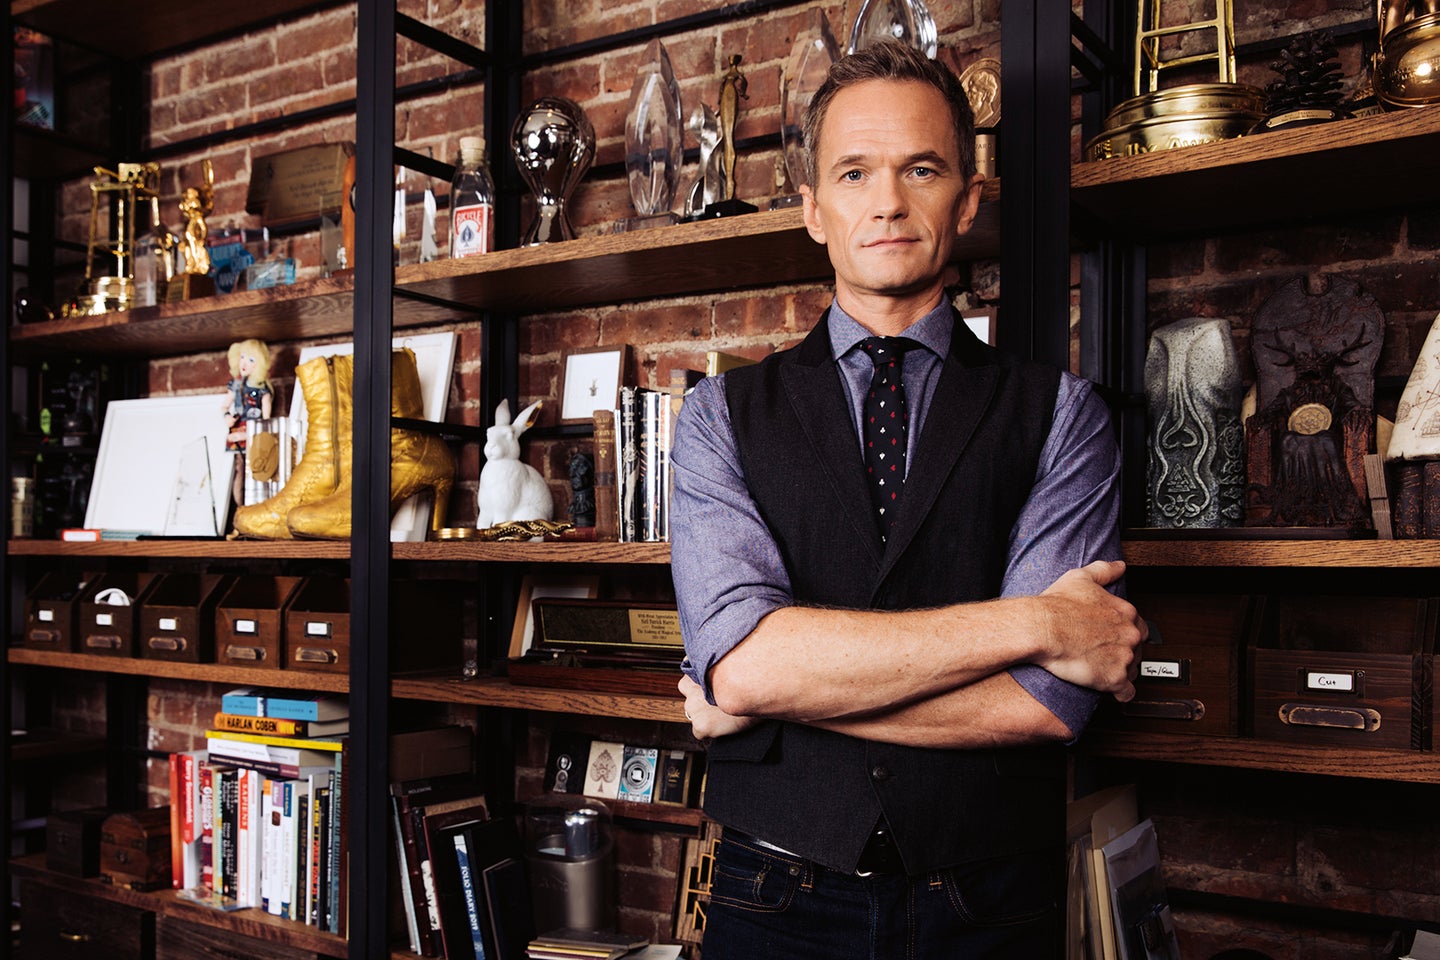 Neil Patrick Harris stands in front of bookcase